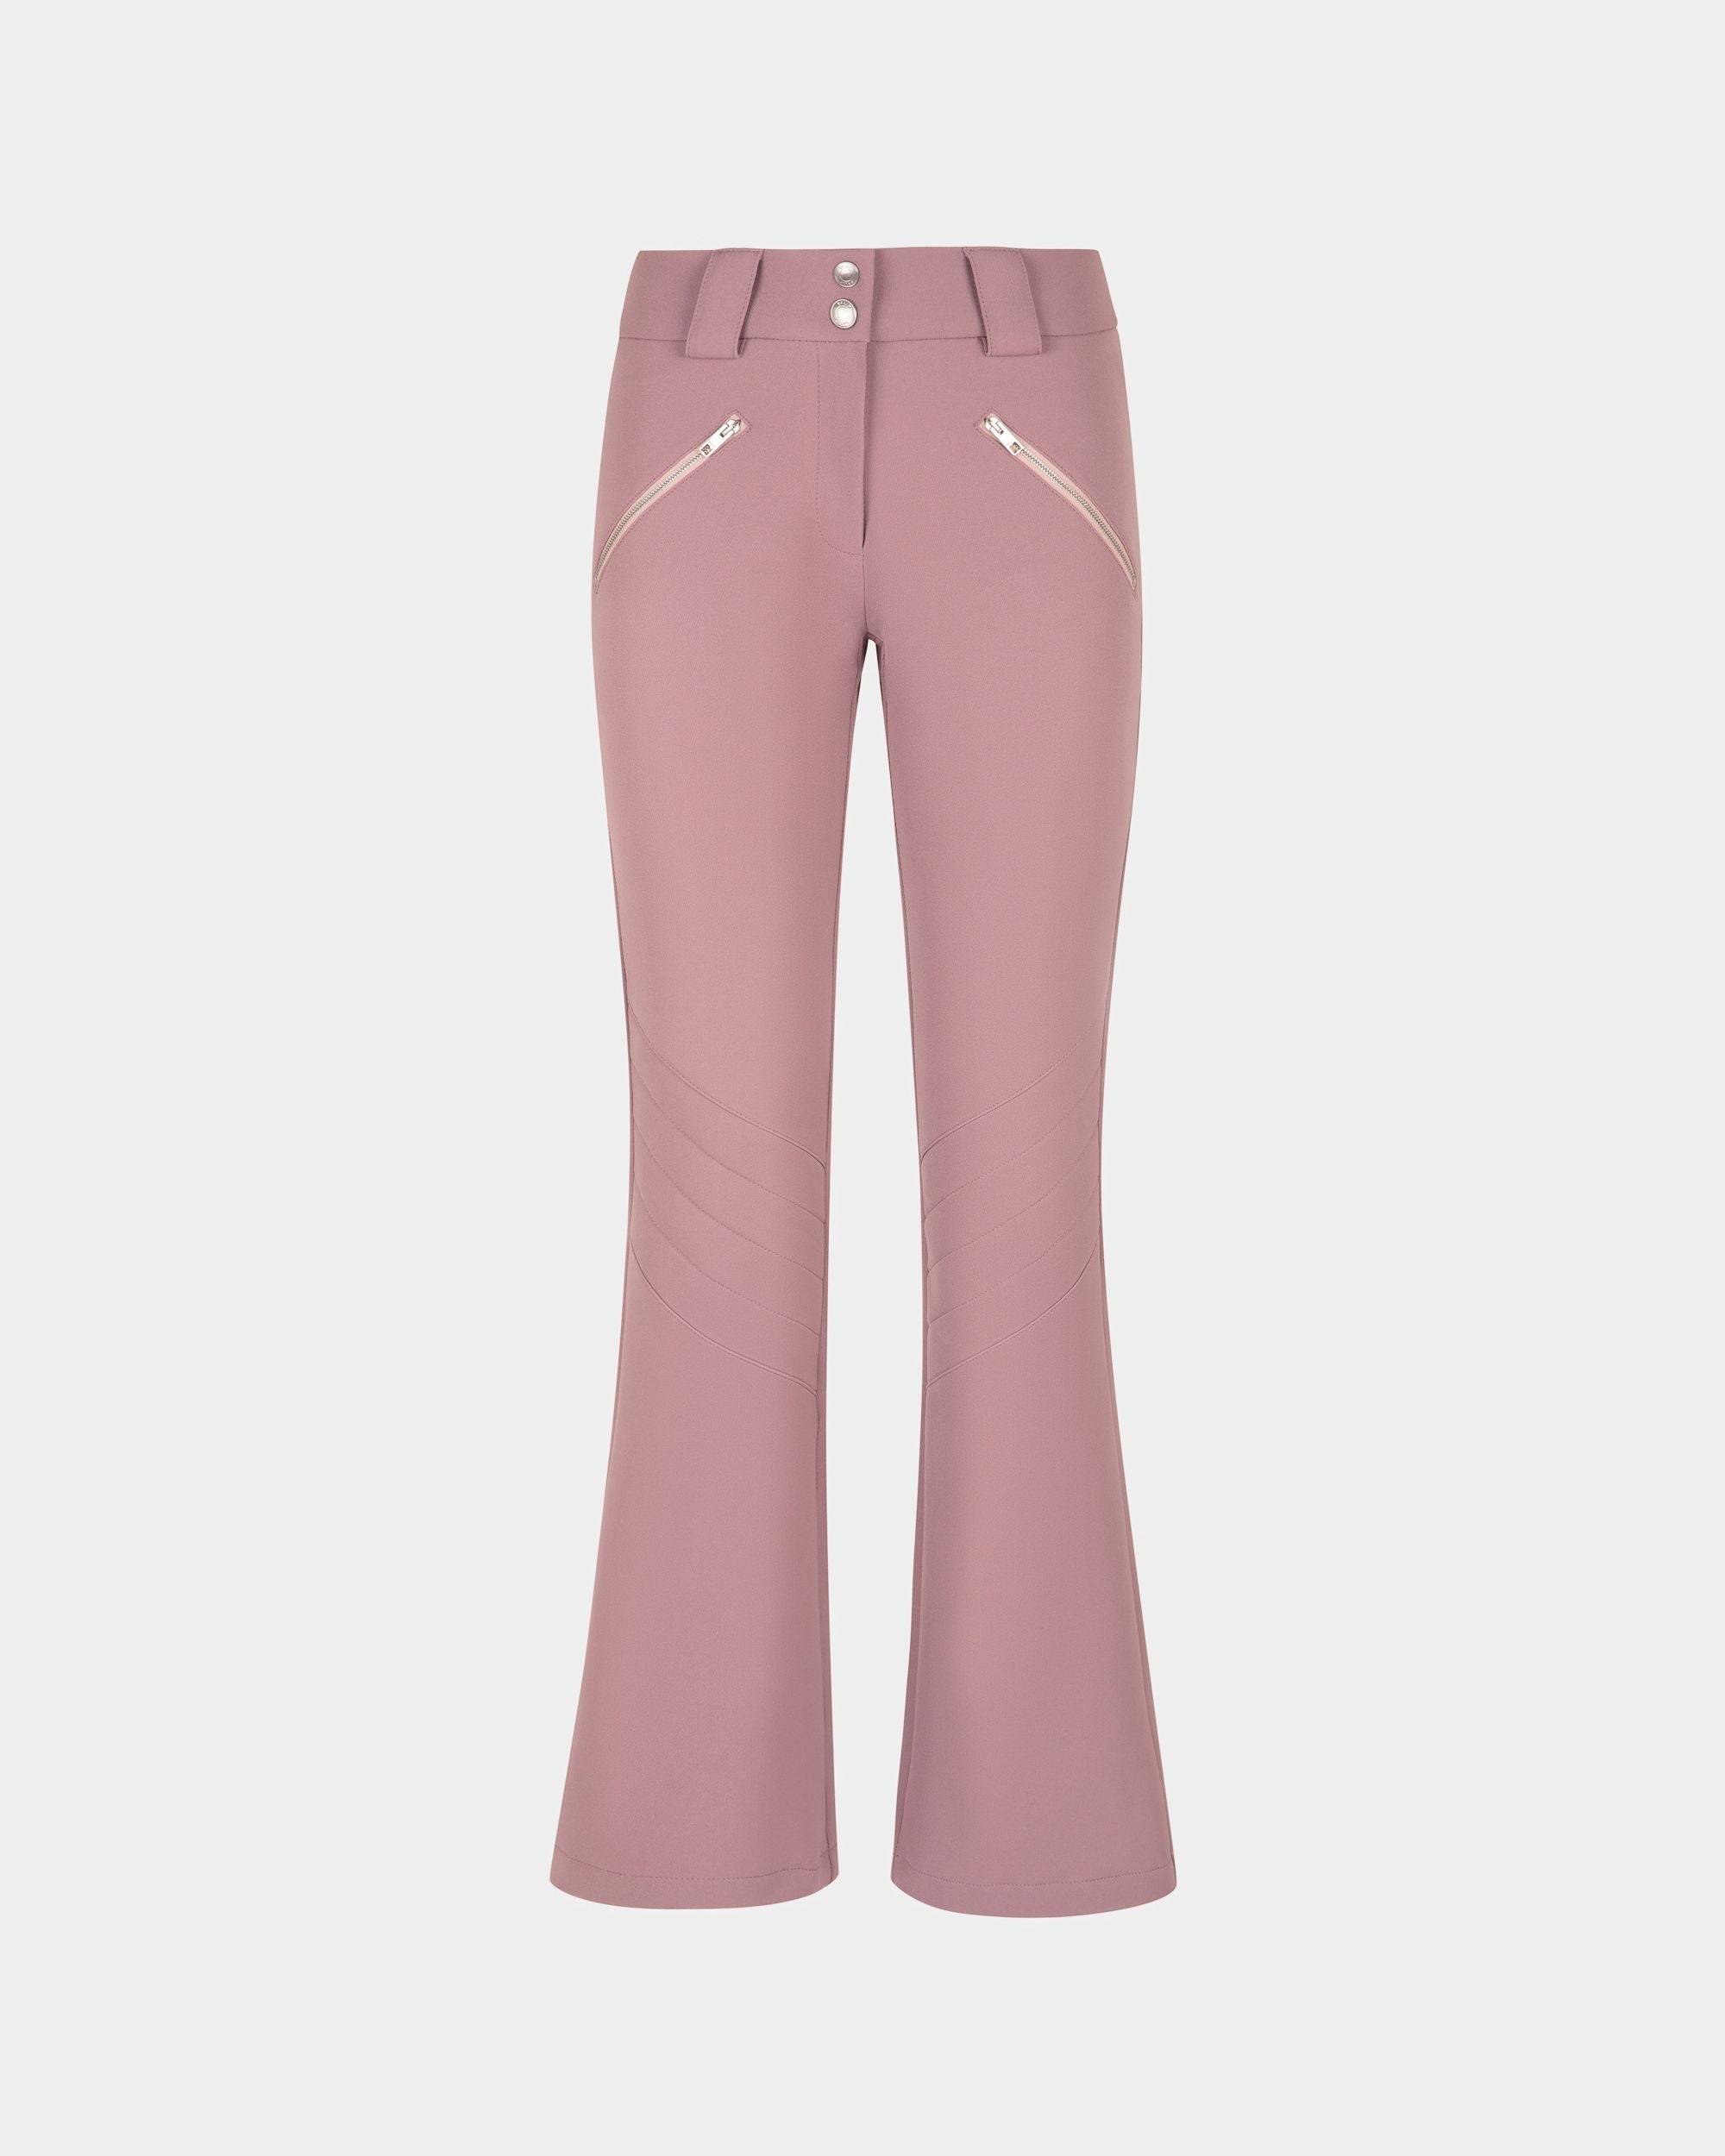 Women's Flared Stretch Pants in Light Pink